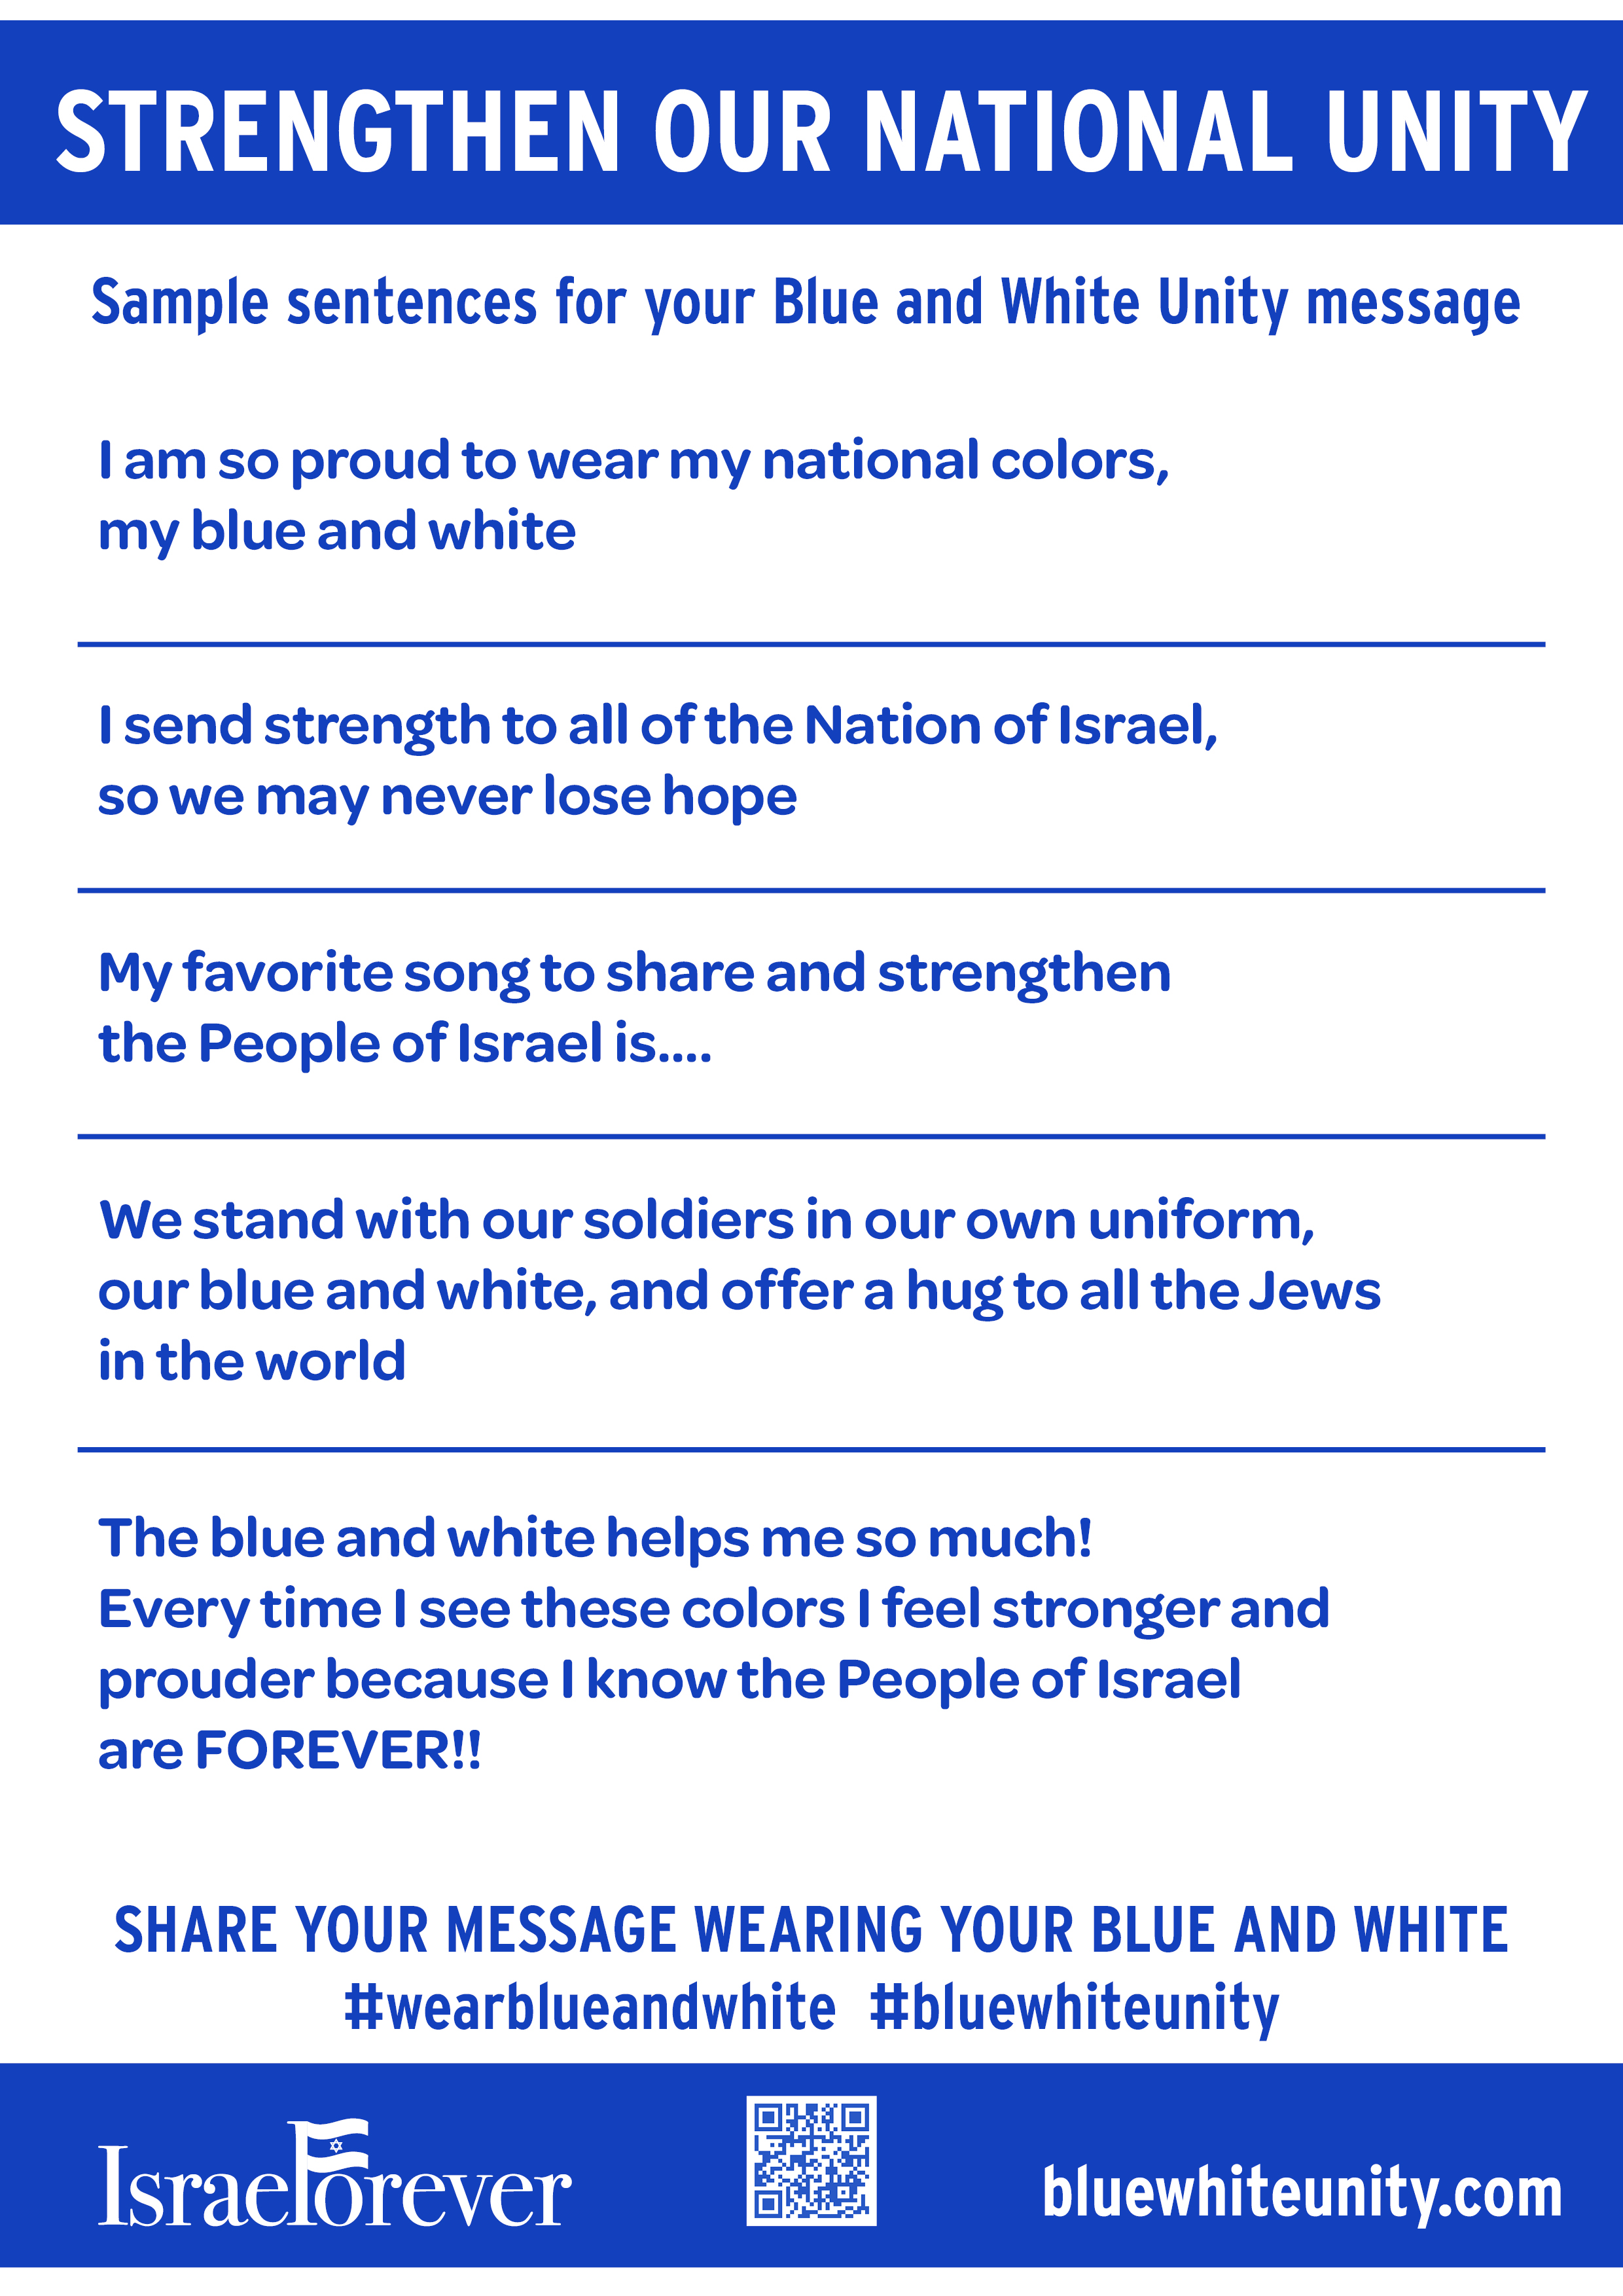 Sample messages for your Blue and White solidarity videos and posts